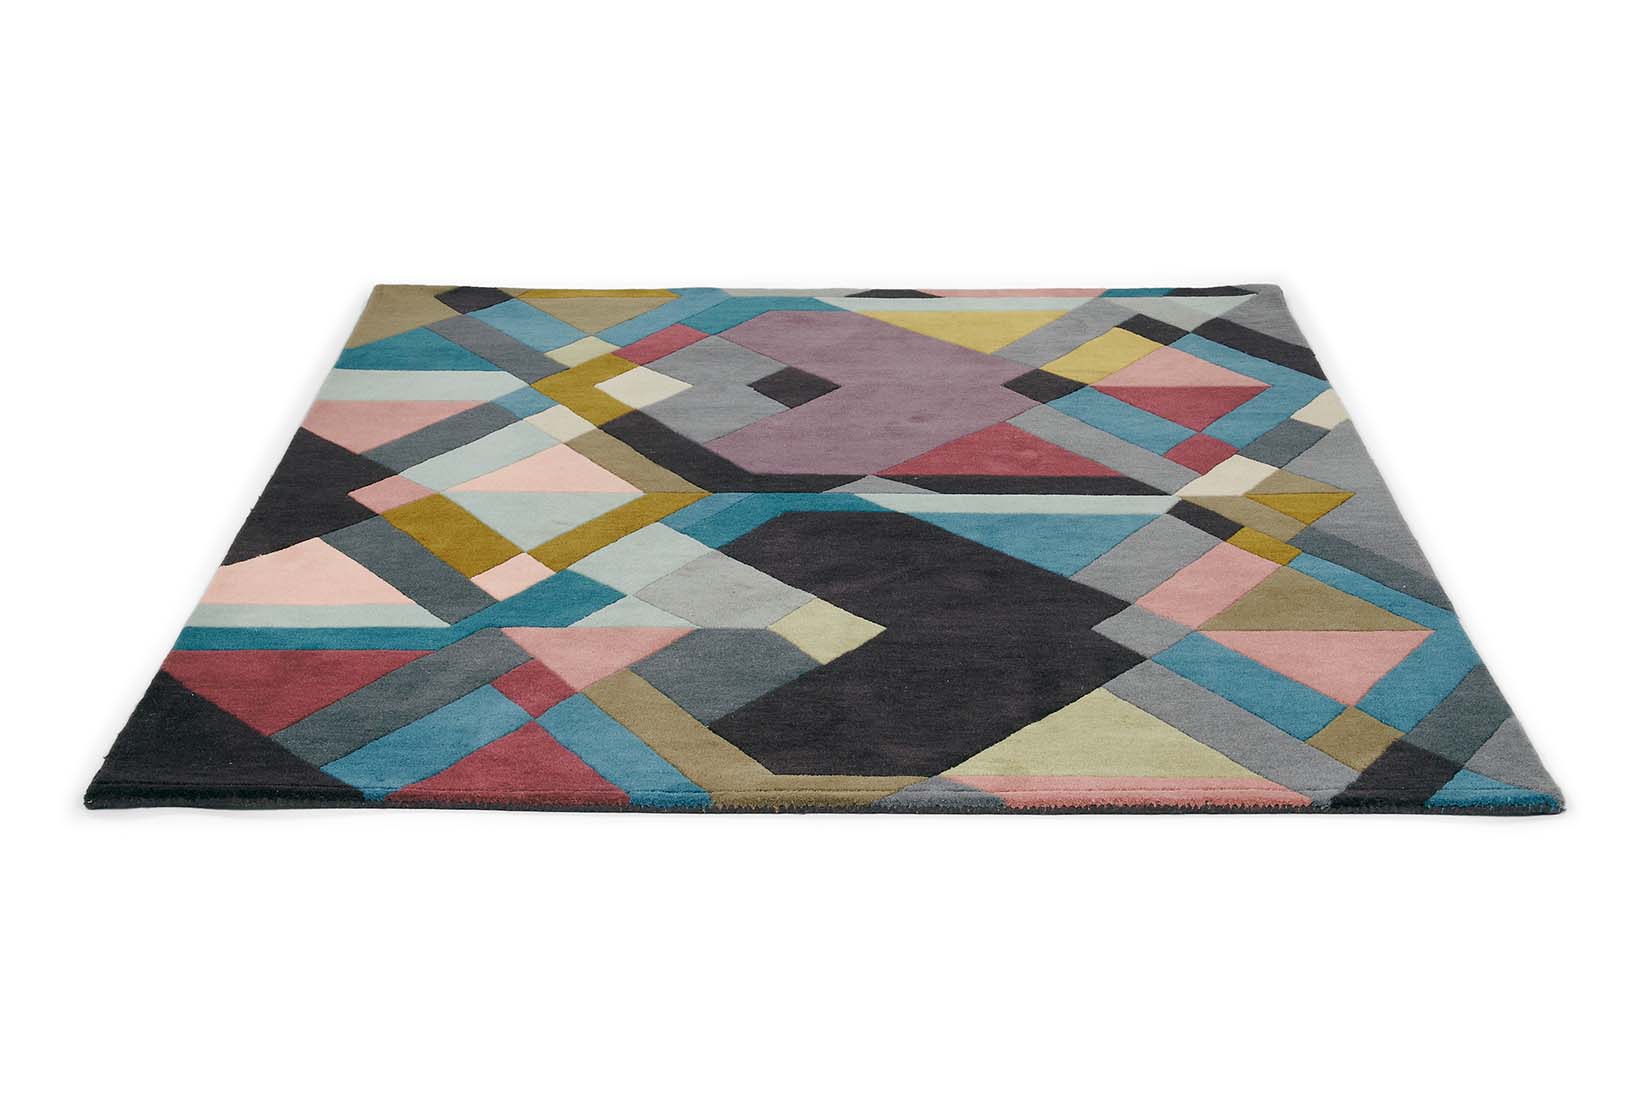 Rectangular rug with geometric pattern of polygons and chevrons in blue